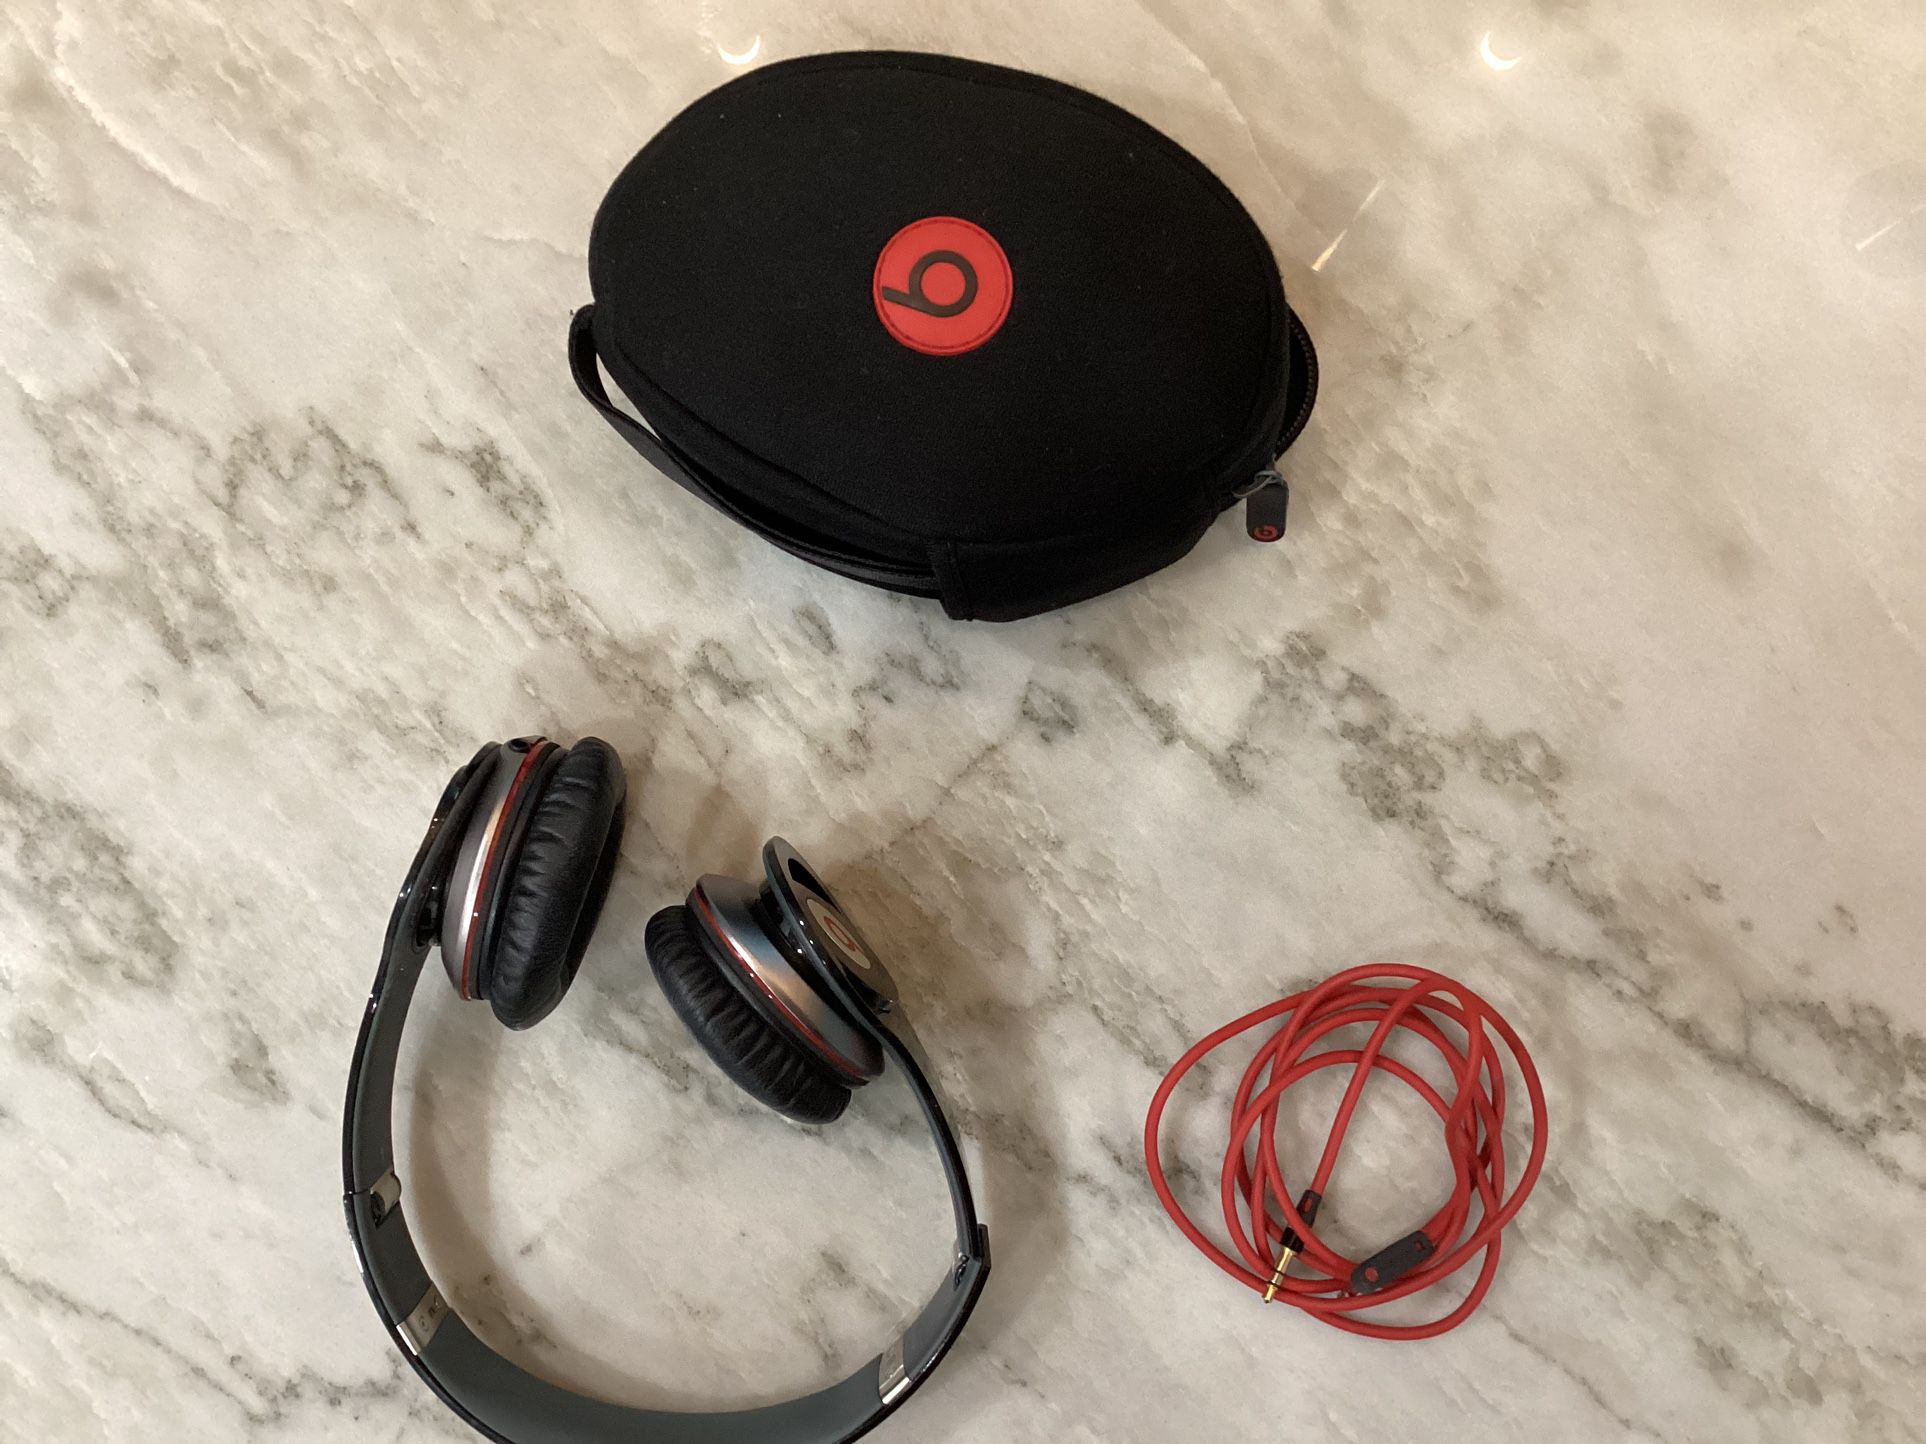 Beats by Dr Dre Solo HD Wired